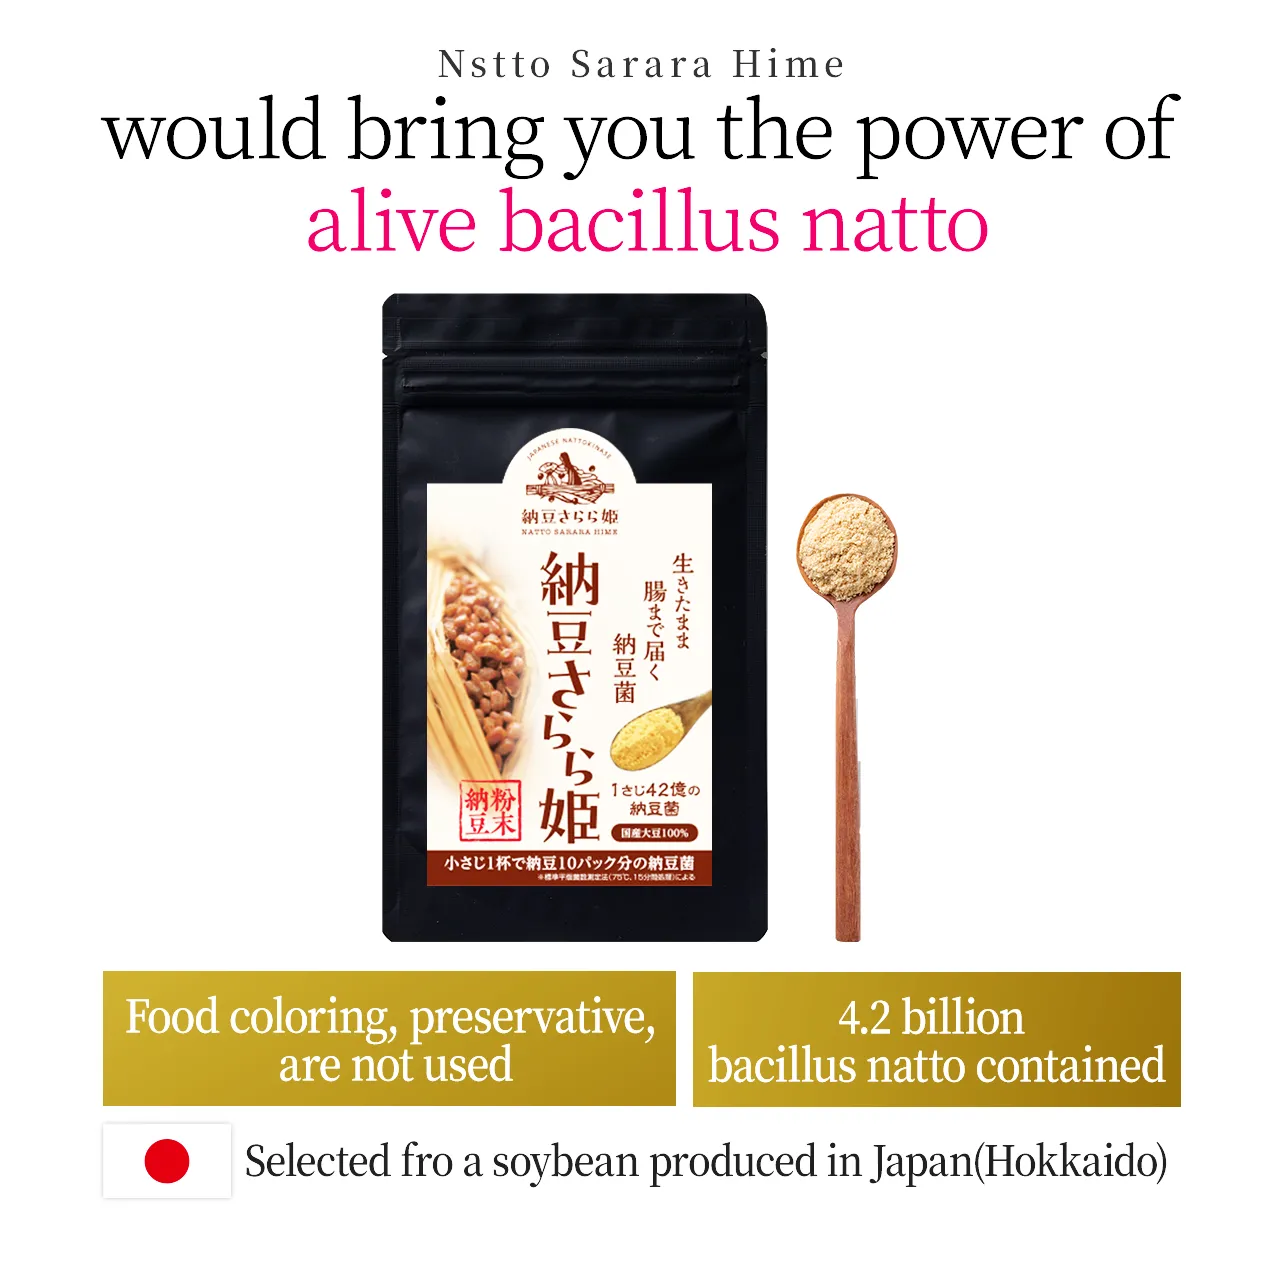 We will deliver the power of Natto Princess